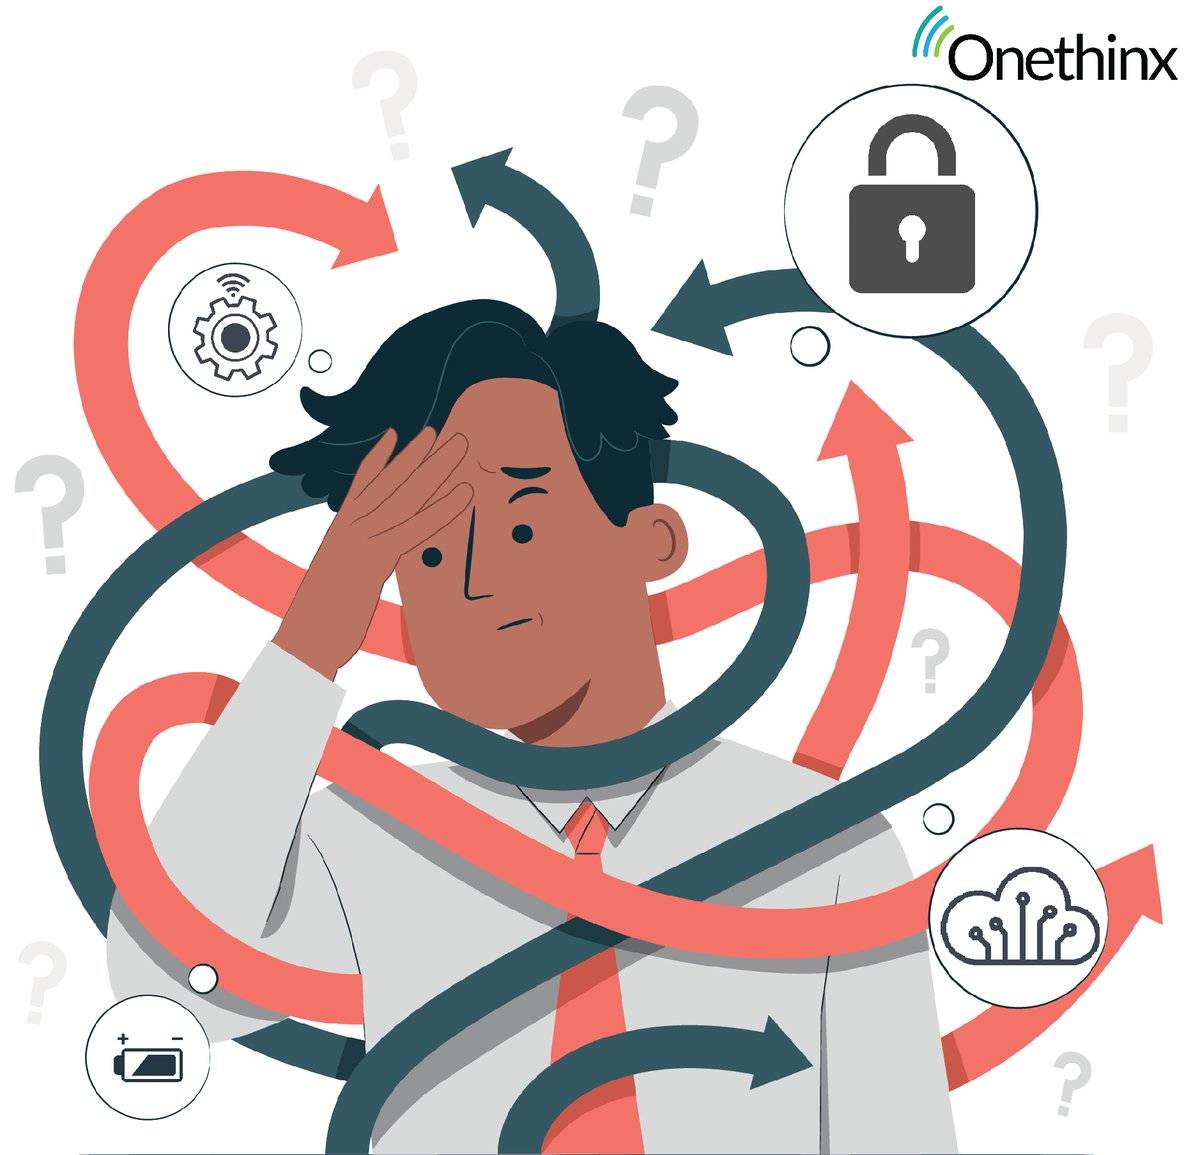 Feeling overwhelmed with your IoT project?😩Get in touch with us to receive the support you need: onethinx.com/contact
#IoT #LoRaWAN #onethinx #simplifyyourproject #connectivity #IoTdevelopment #successfulsolution #security #loraalliance #psacertified #internetofthings